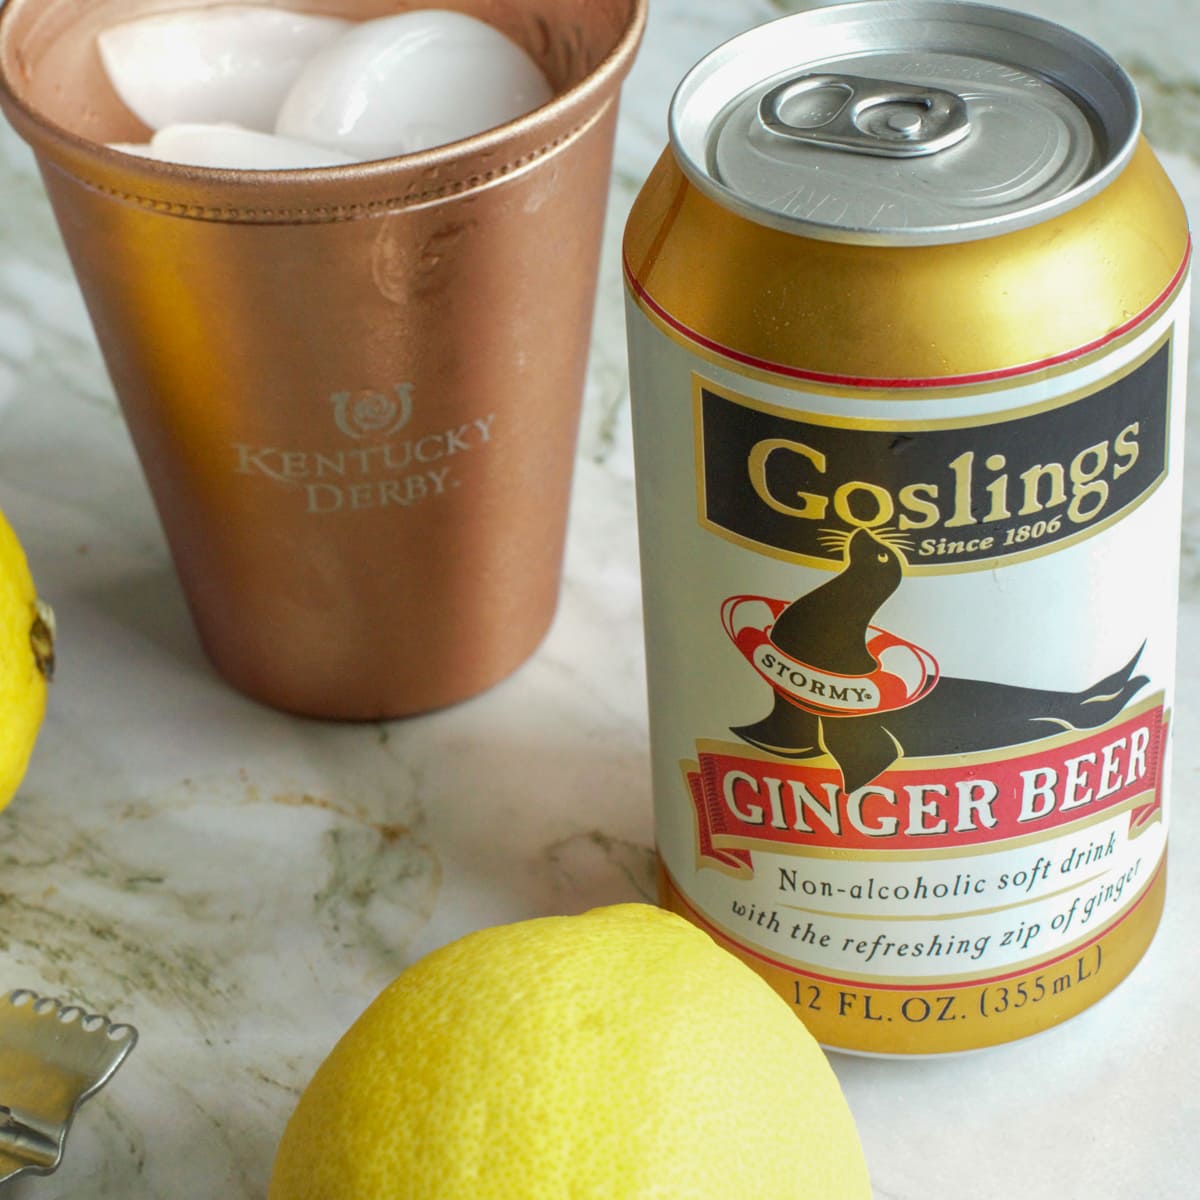 Ice, lemon and Goslings Ginger Beer on a counter.